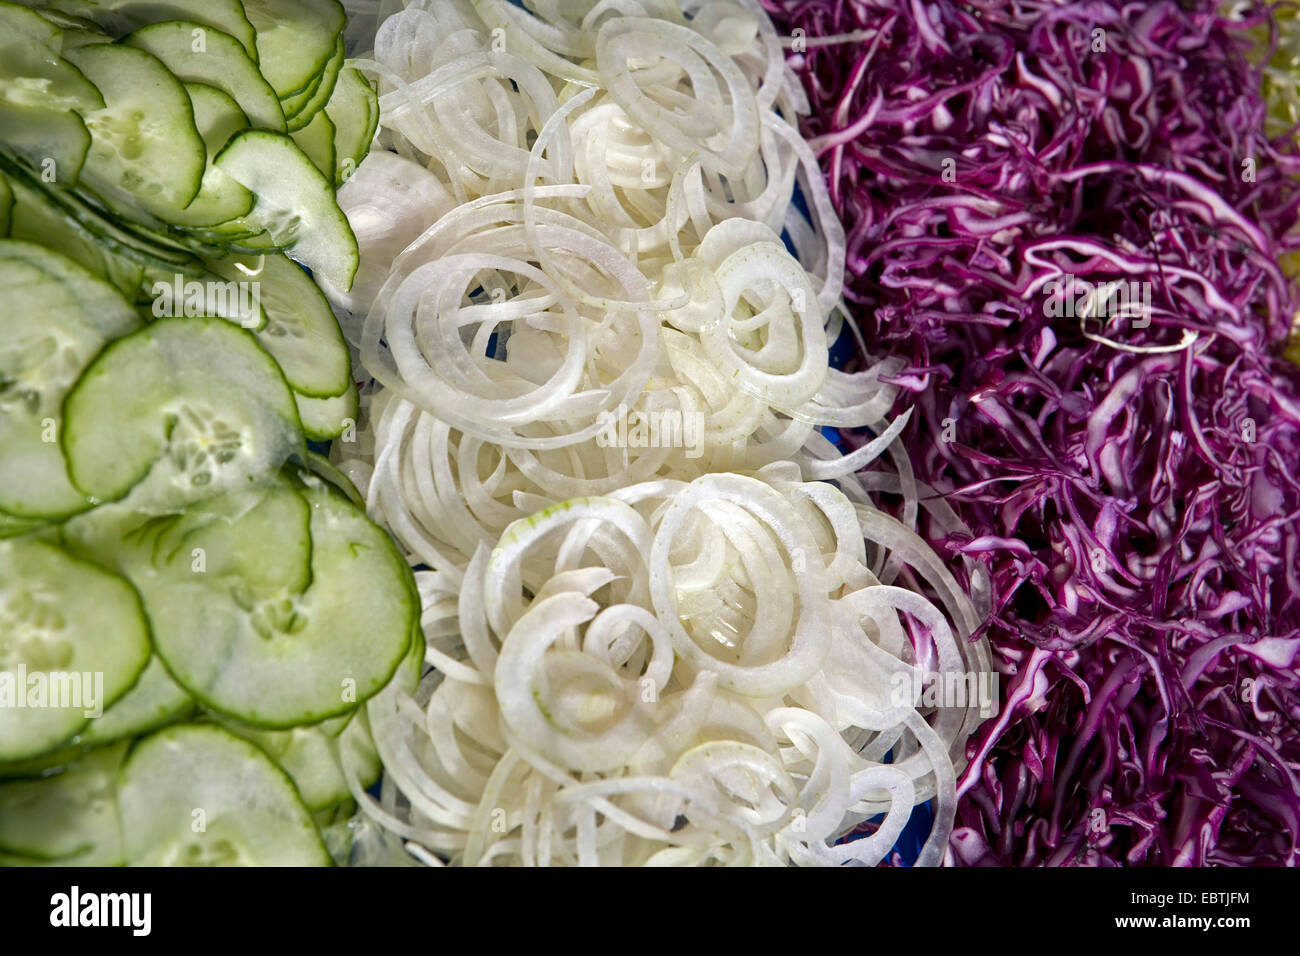 uncooked vegetarian food, cucumbers, onions, red cabbage Stock Photo